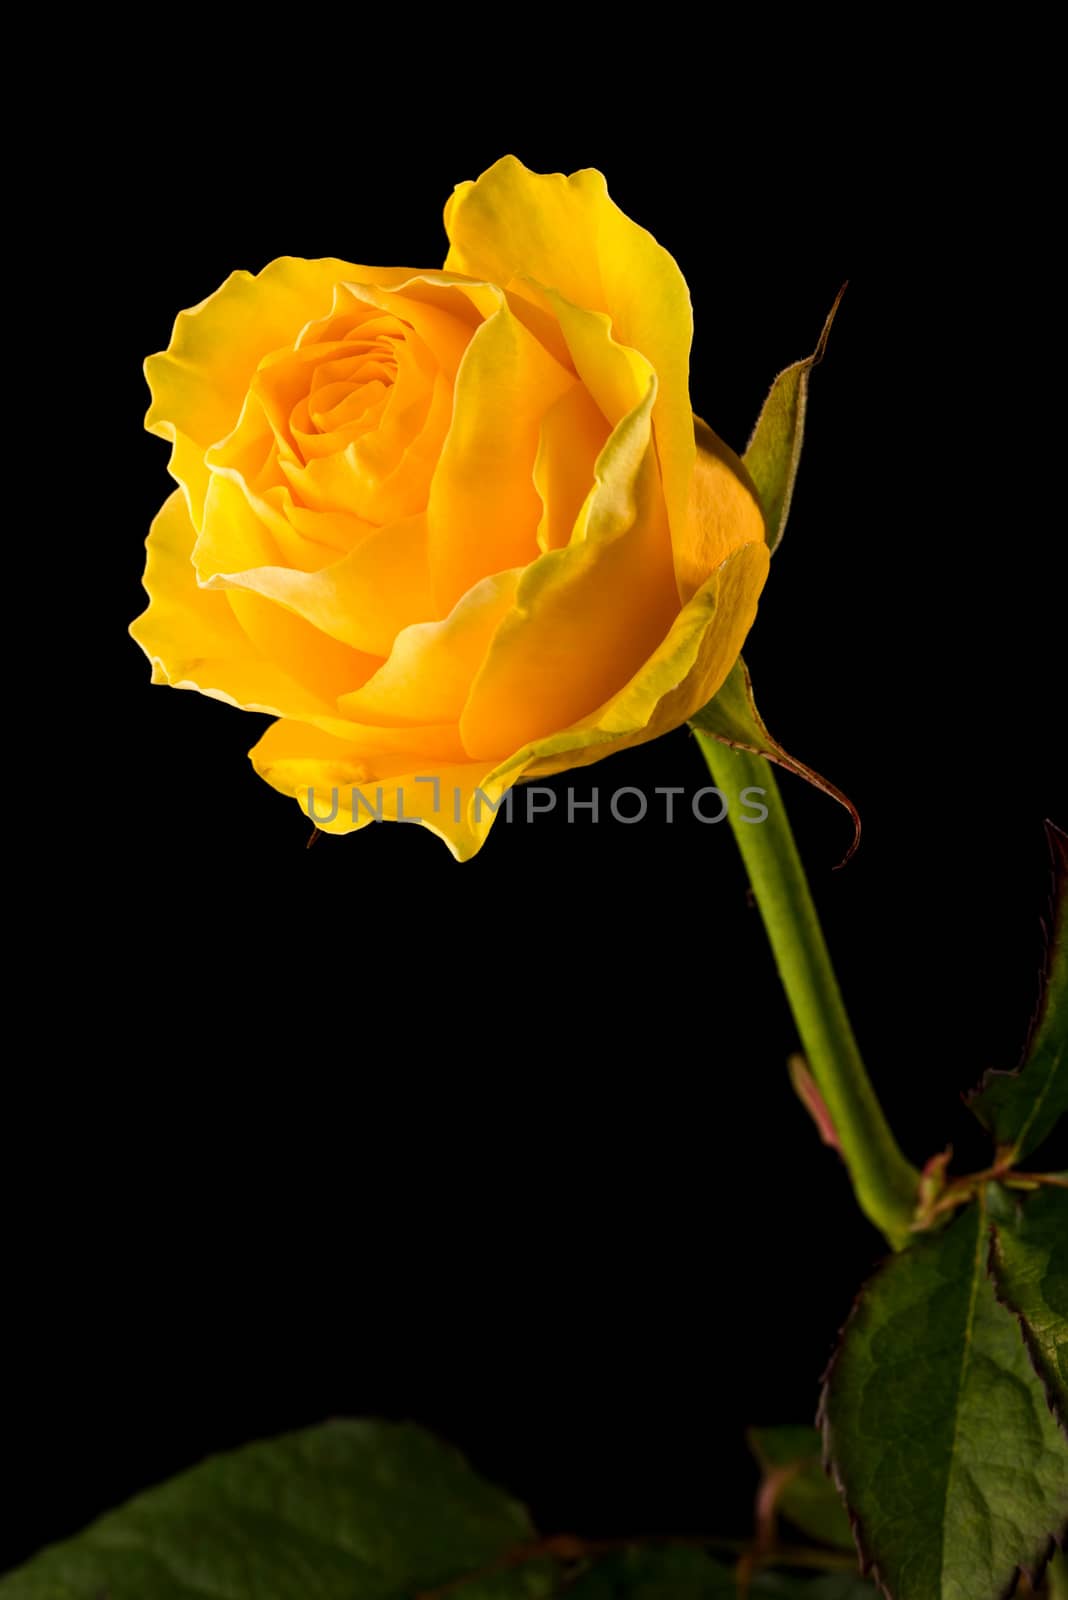 Closeup of a yellow rose on black background